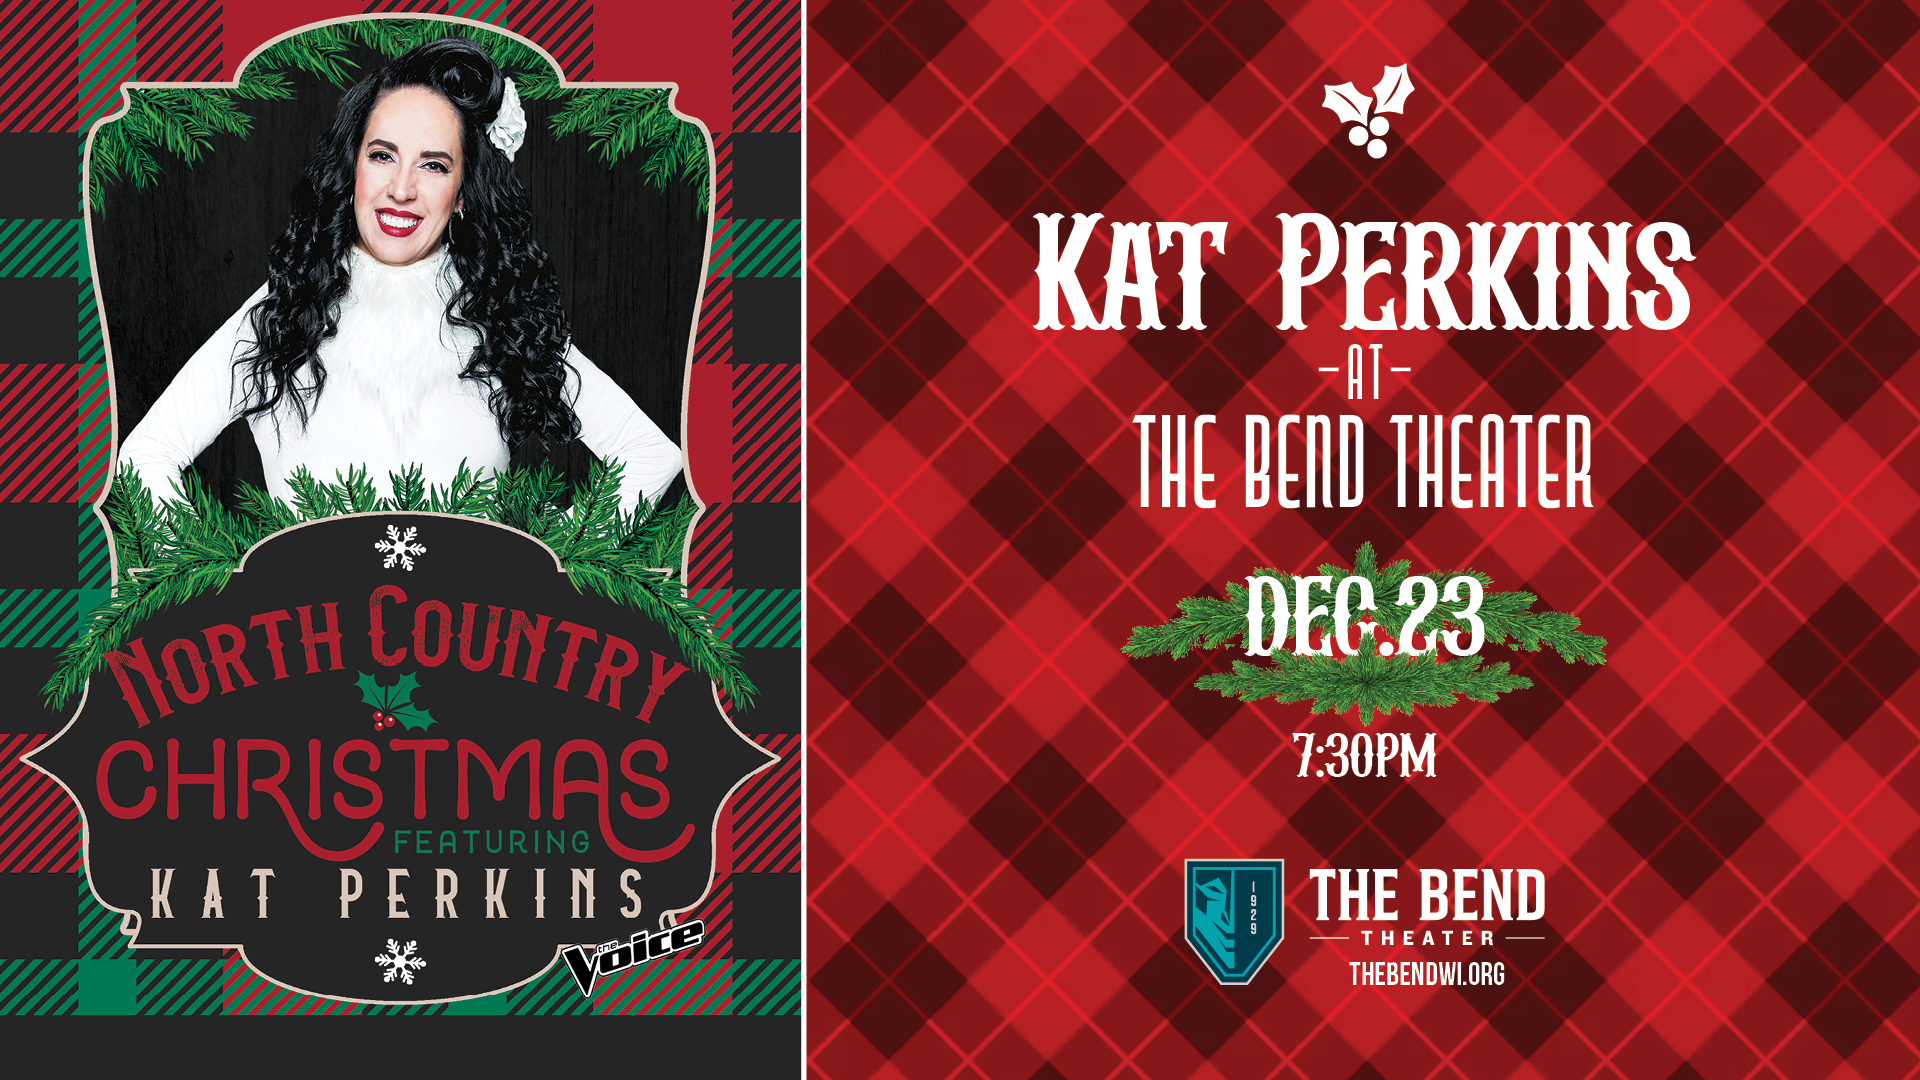 North Country Christmas featuring Kat Perkins